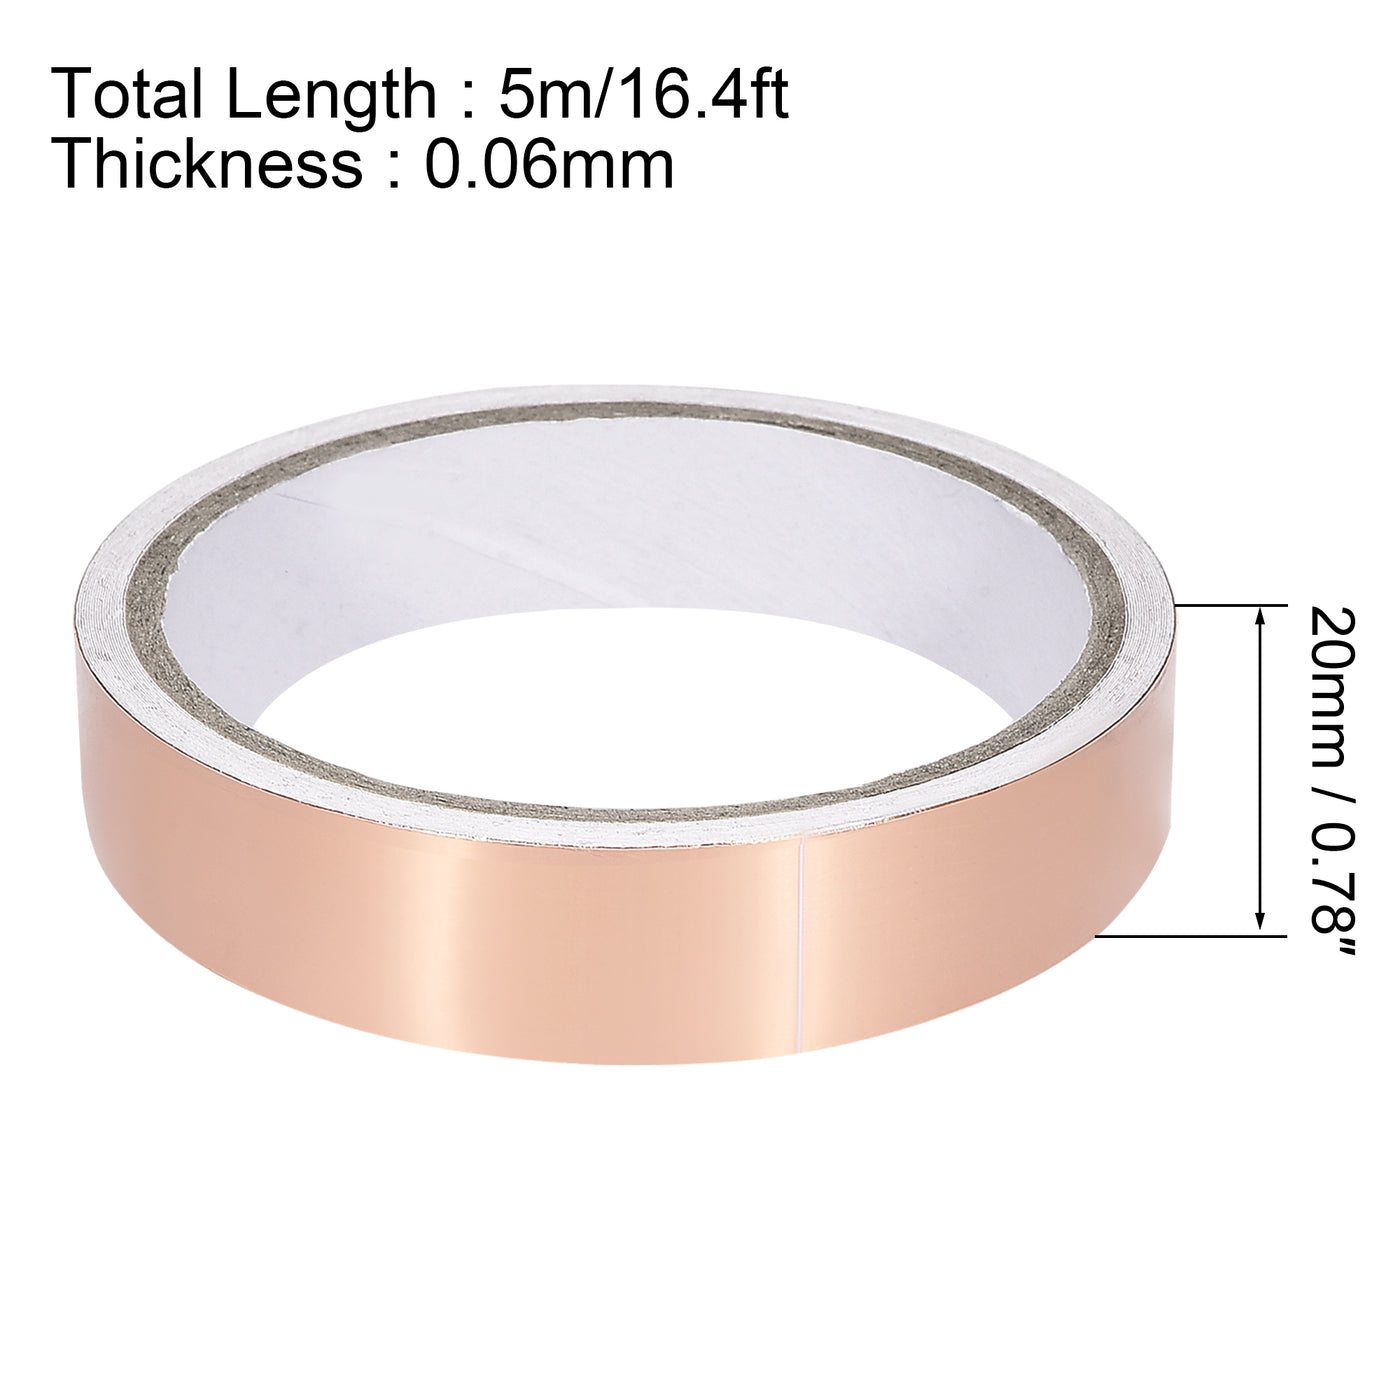 uxcell Uxcell Single-Sided Conductive Tape Copper Foil Tape 20mm x 5m/16.4ft for EMI Shielding 2pcs